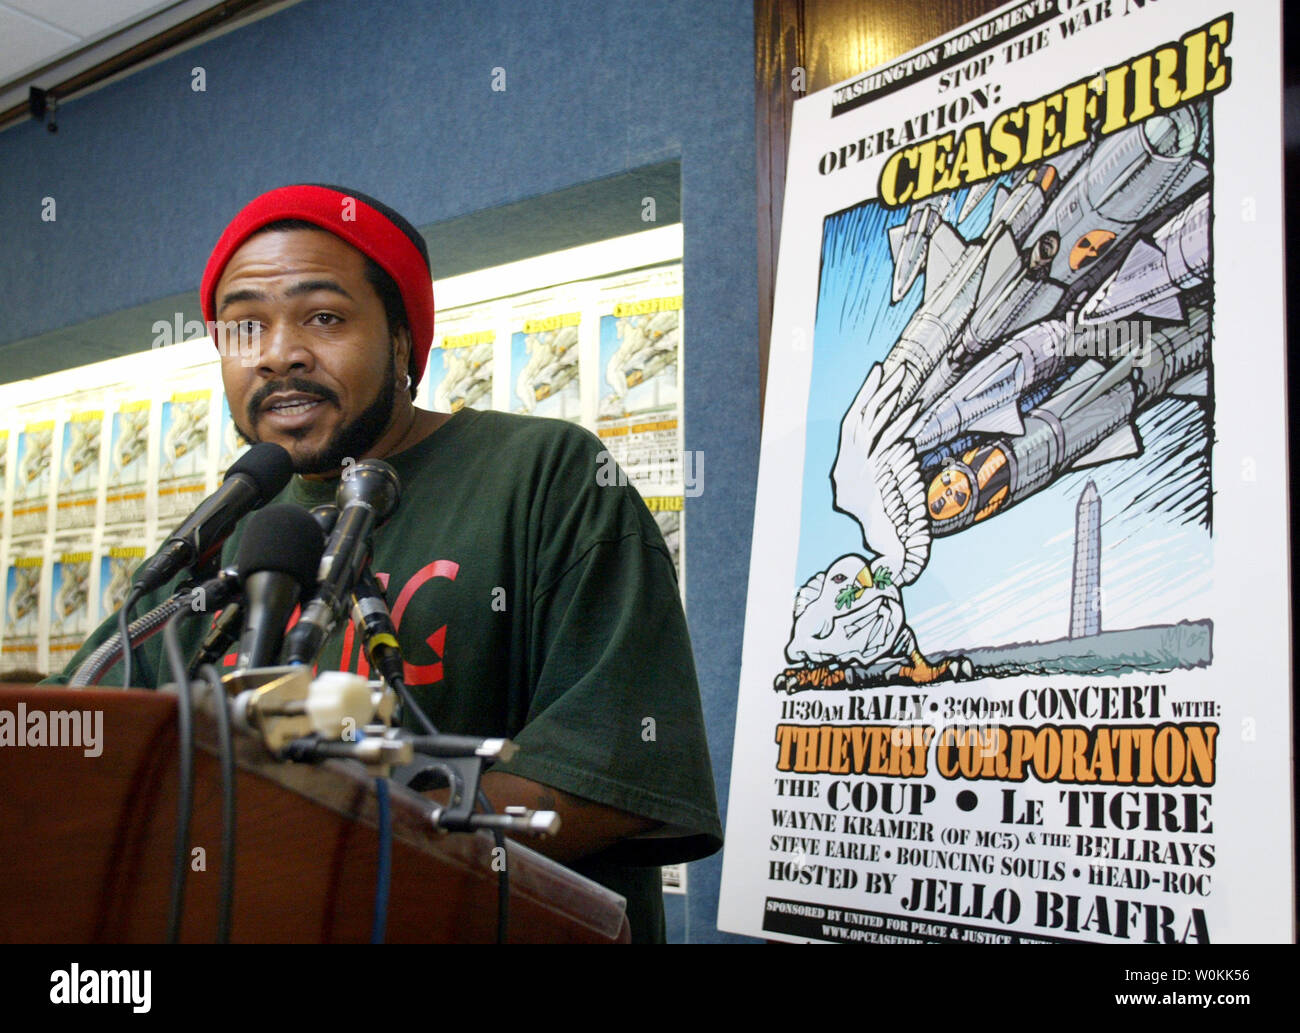 A recording artist Head-Roc speaks at a news conference at the National Press building in Washington, August 10, 2005. United for Peace and Justice holds a news conference to announce a concert, 'Operation Ceasefire,' to help raise awareness of the situation facing American soldiers in Iraq. (UPI Photo/Yuri Gripas) Stock Photo